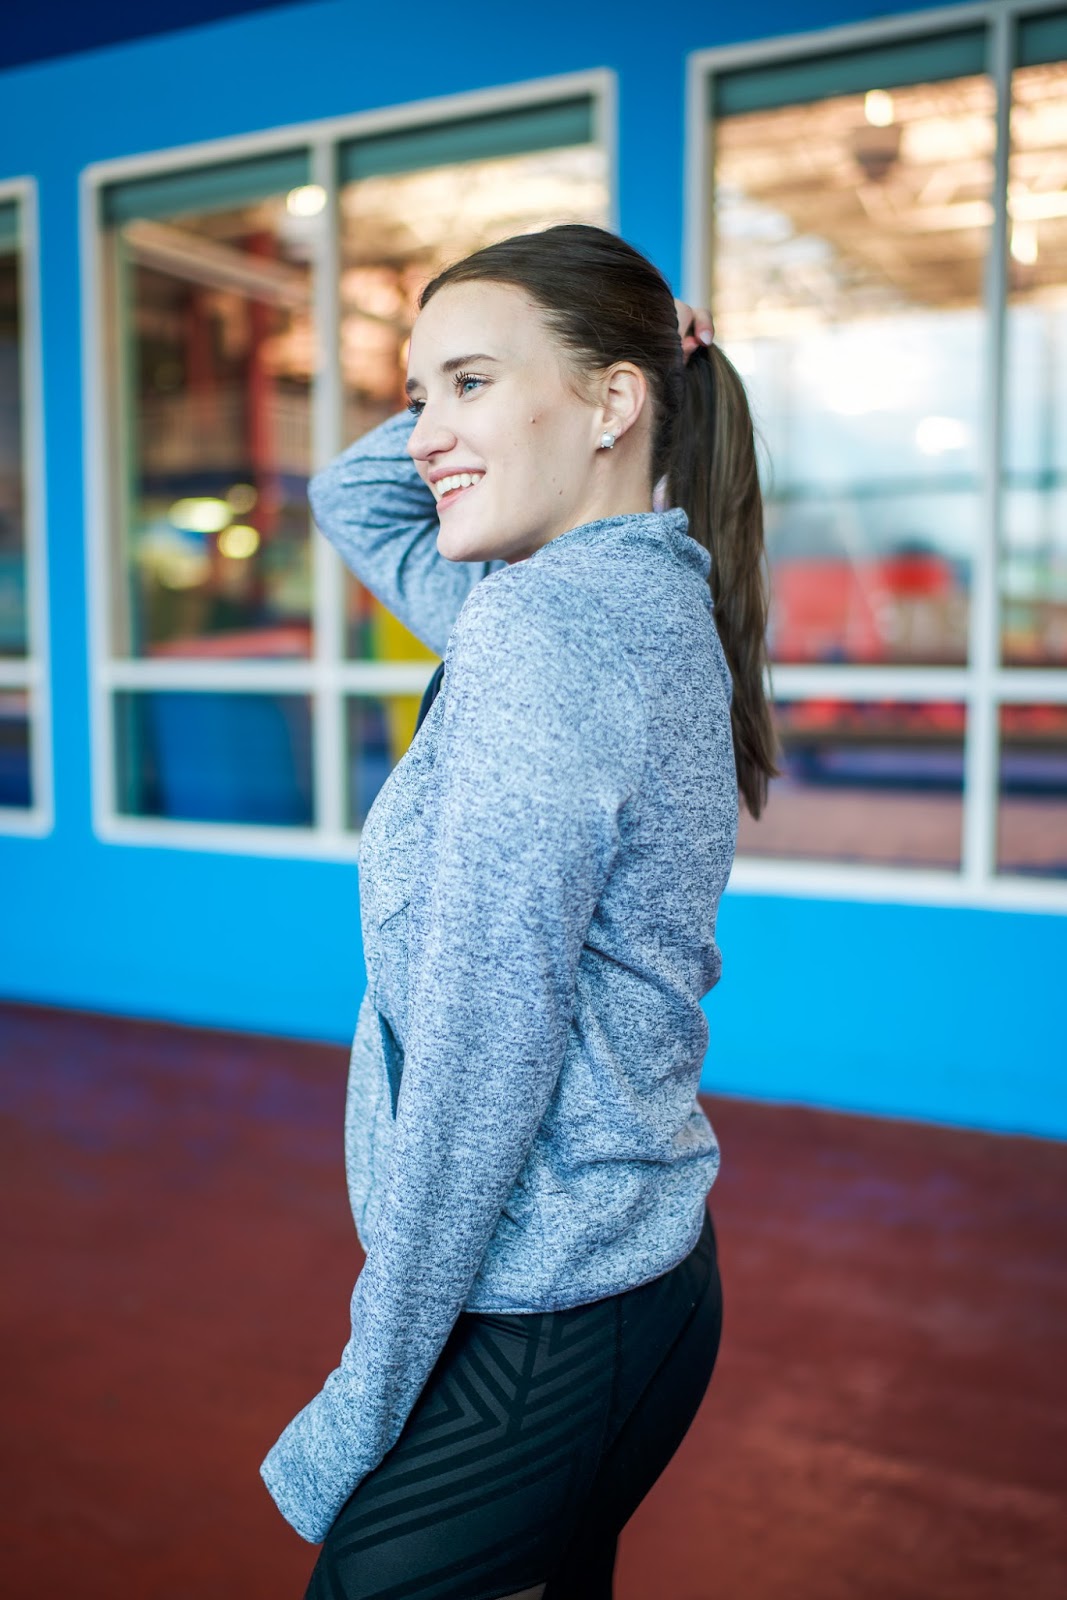 Affordable Activewear by popular New York fashion blogger Covering the Bases